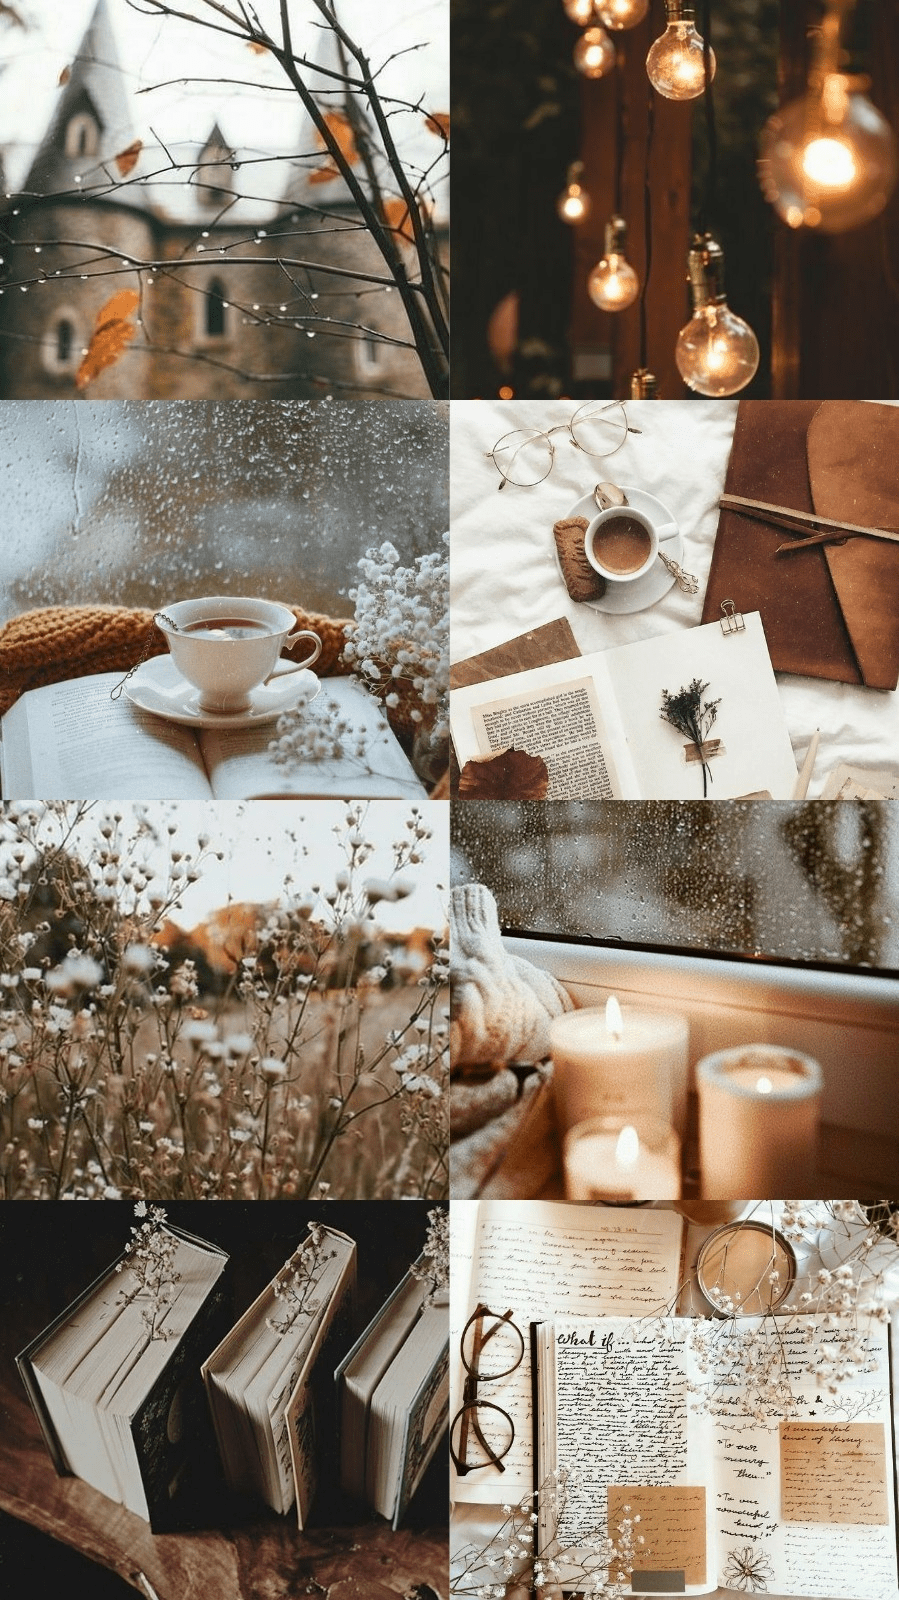 A collage of pictures with candles and books - Cozy